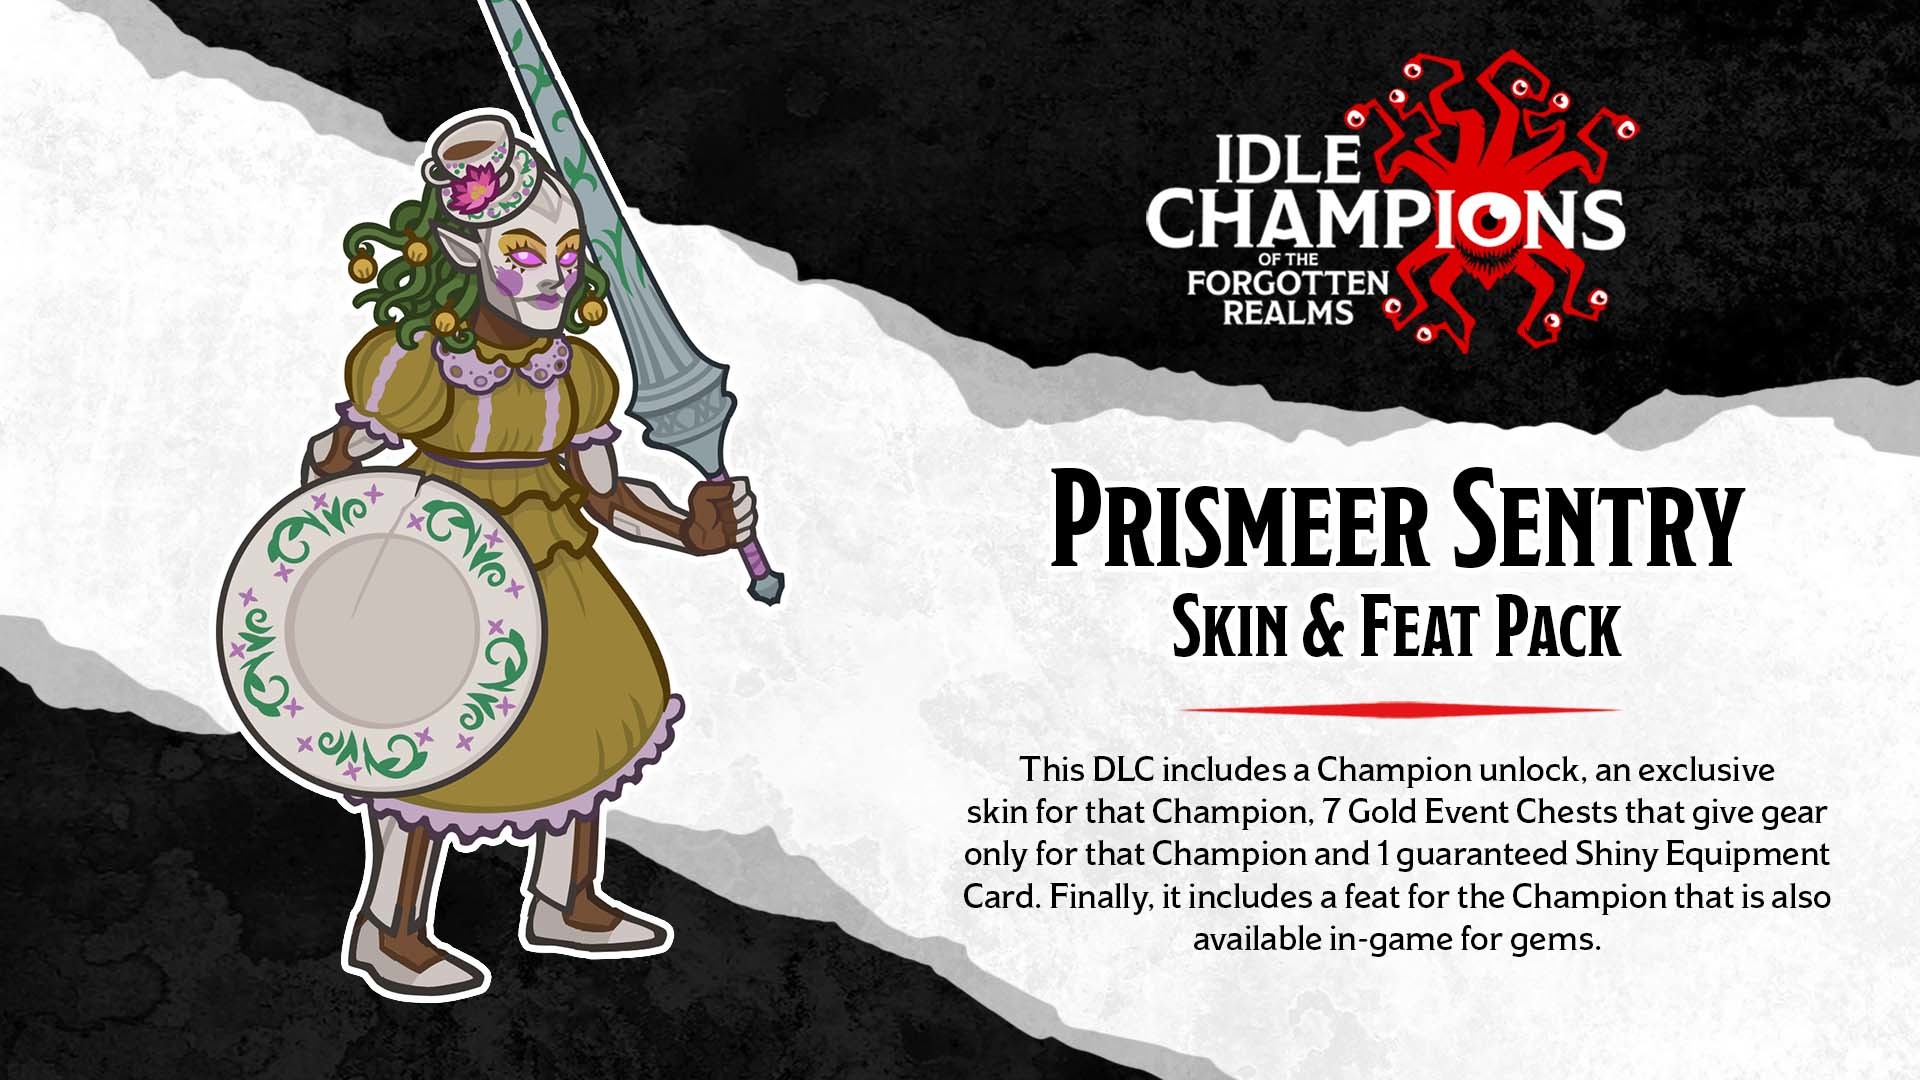 Idle Champions - Prismeer Sentry Skin & Feat Pack DLC Steam CD Key, 1.05 usd